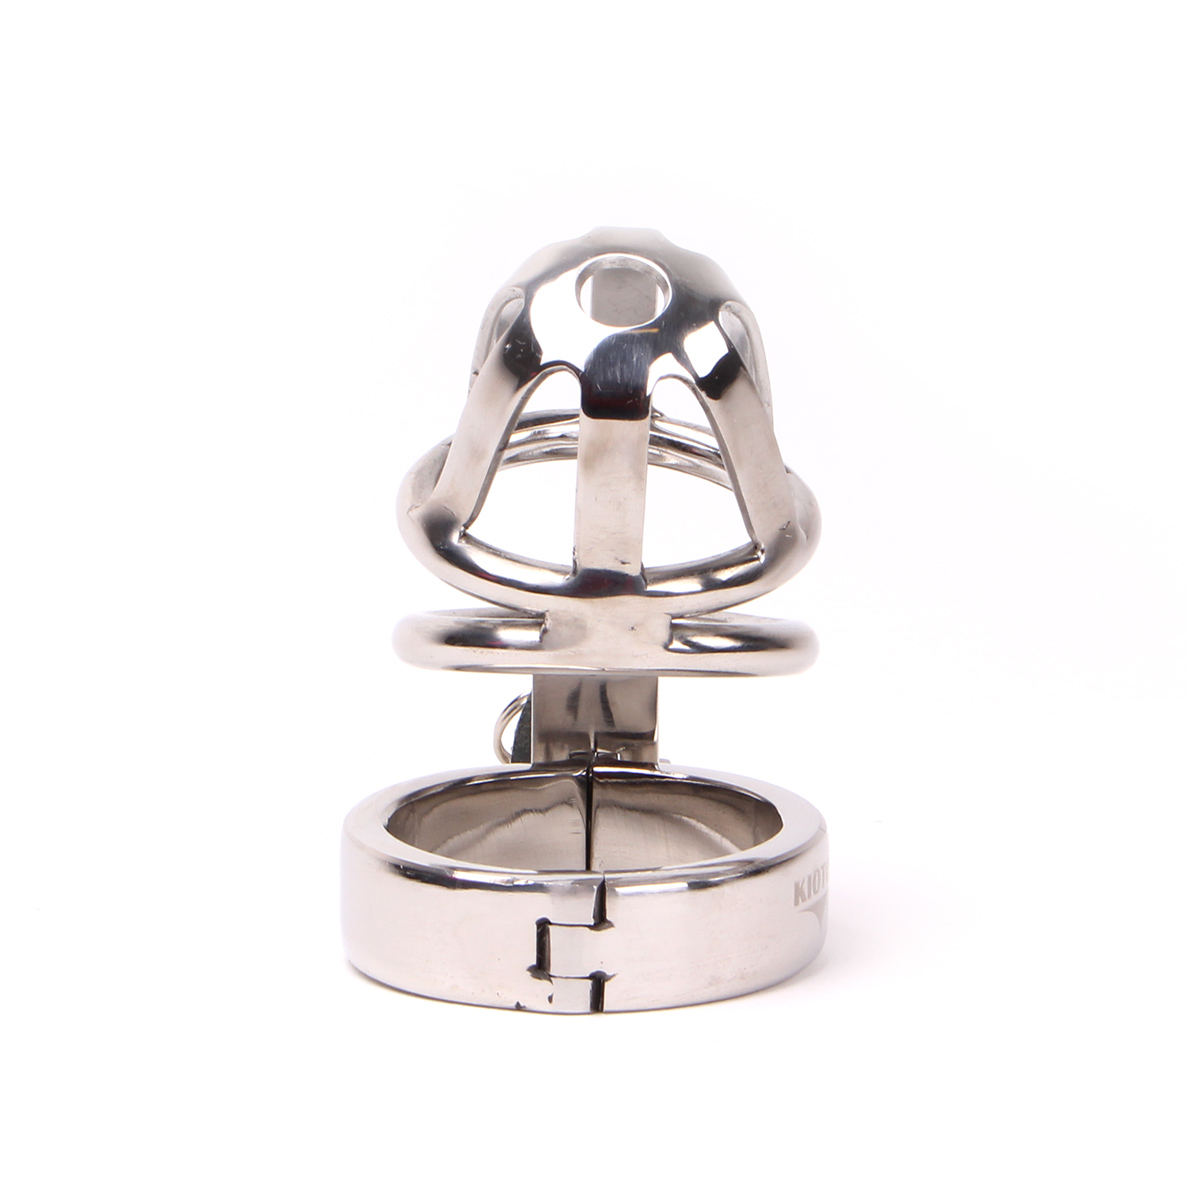 Chastity-Cage-Small-Steel-OPR-277030-2